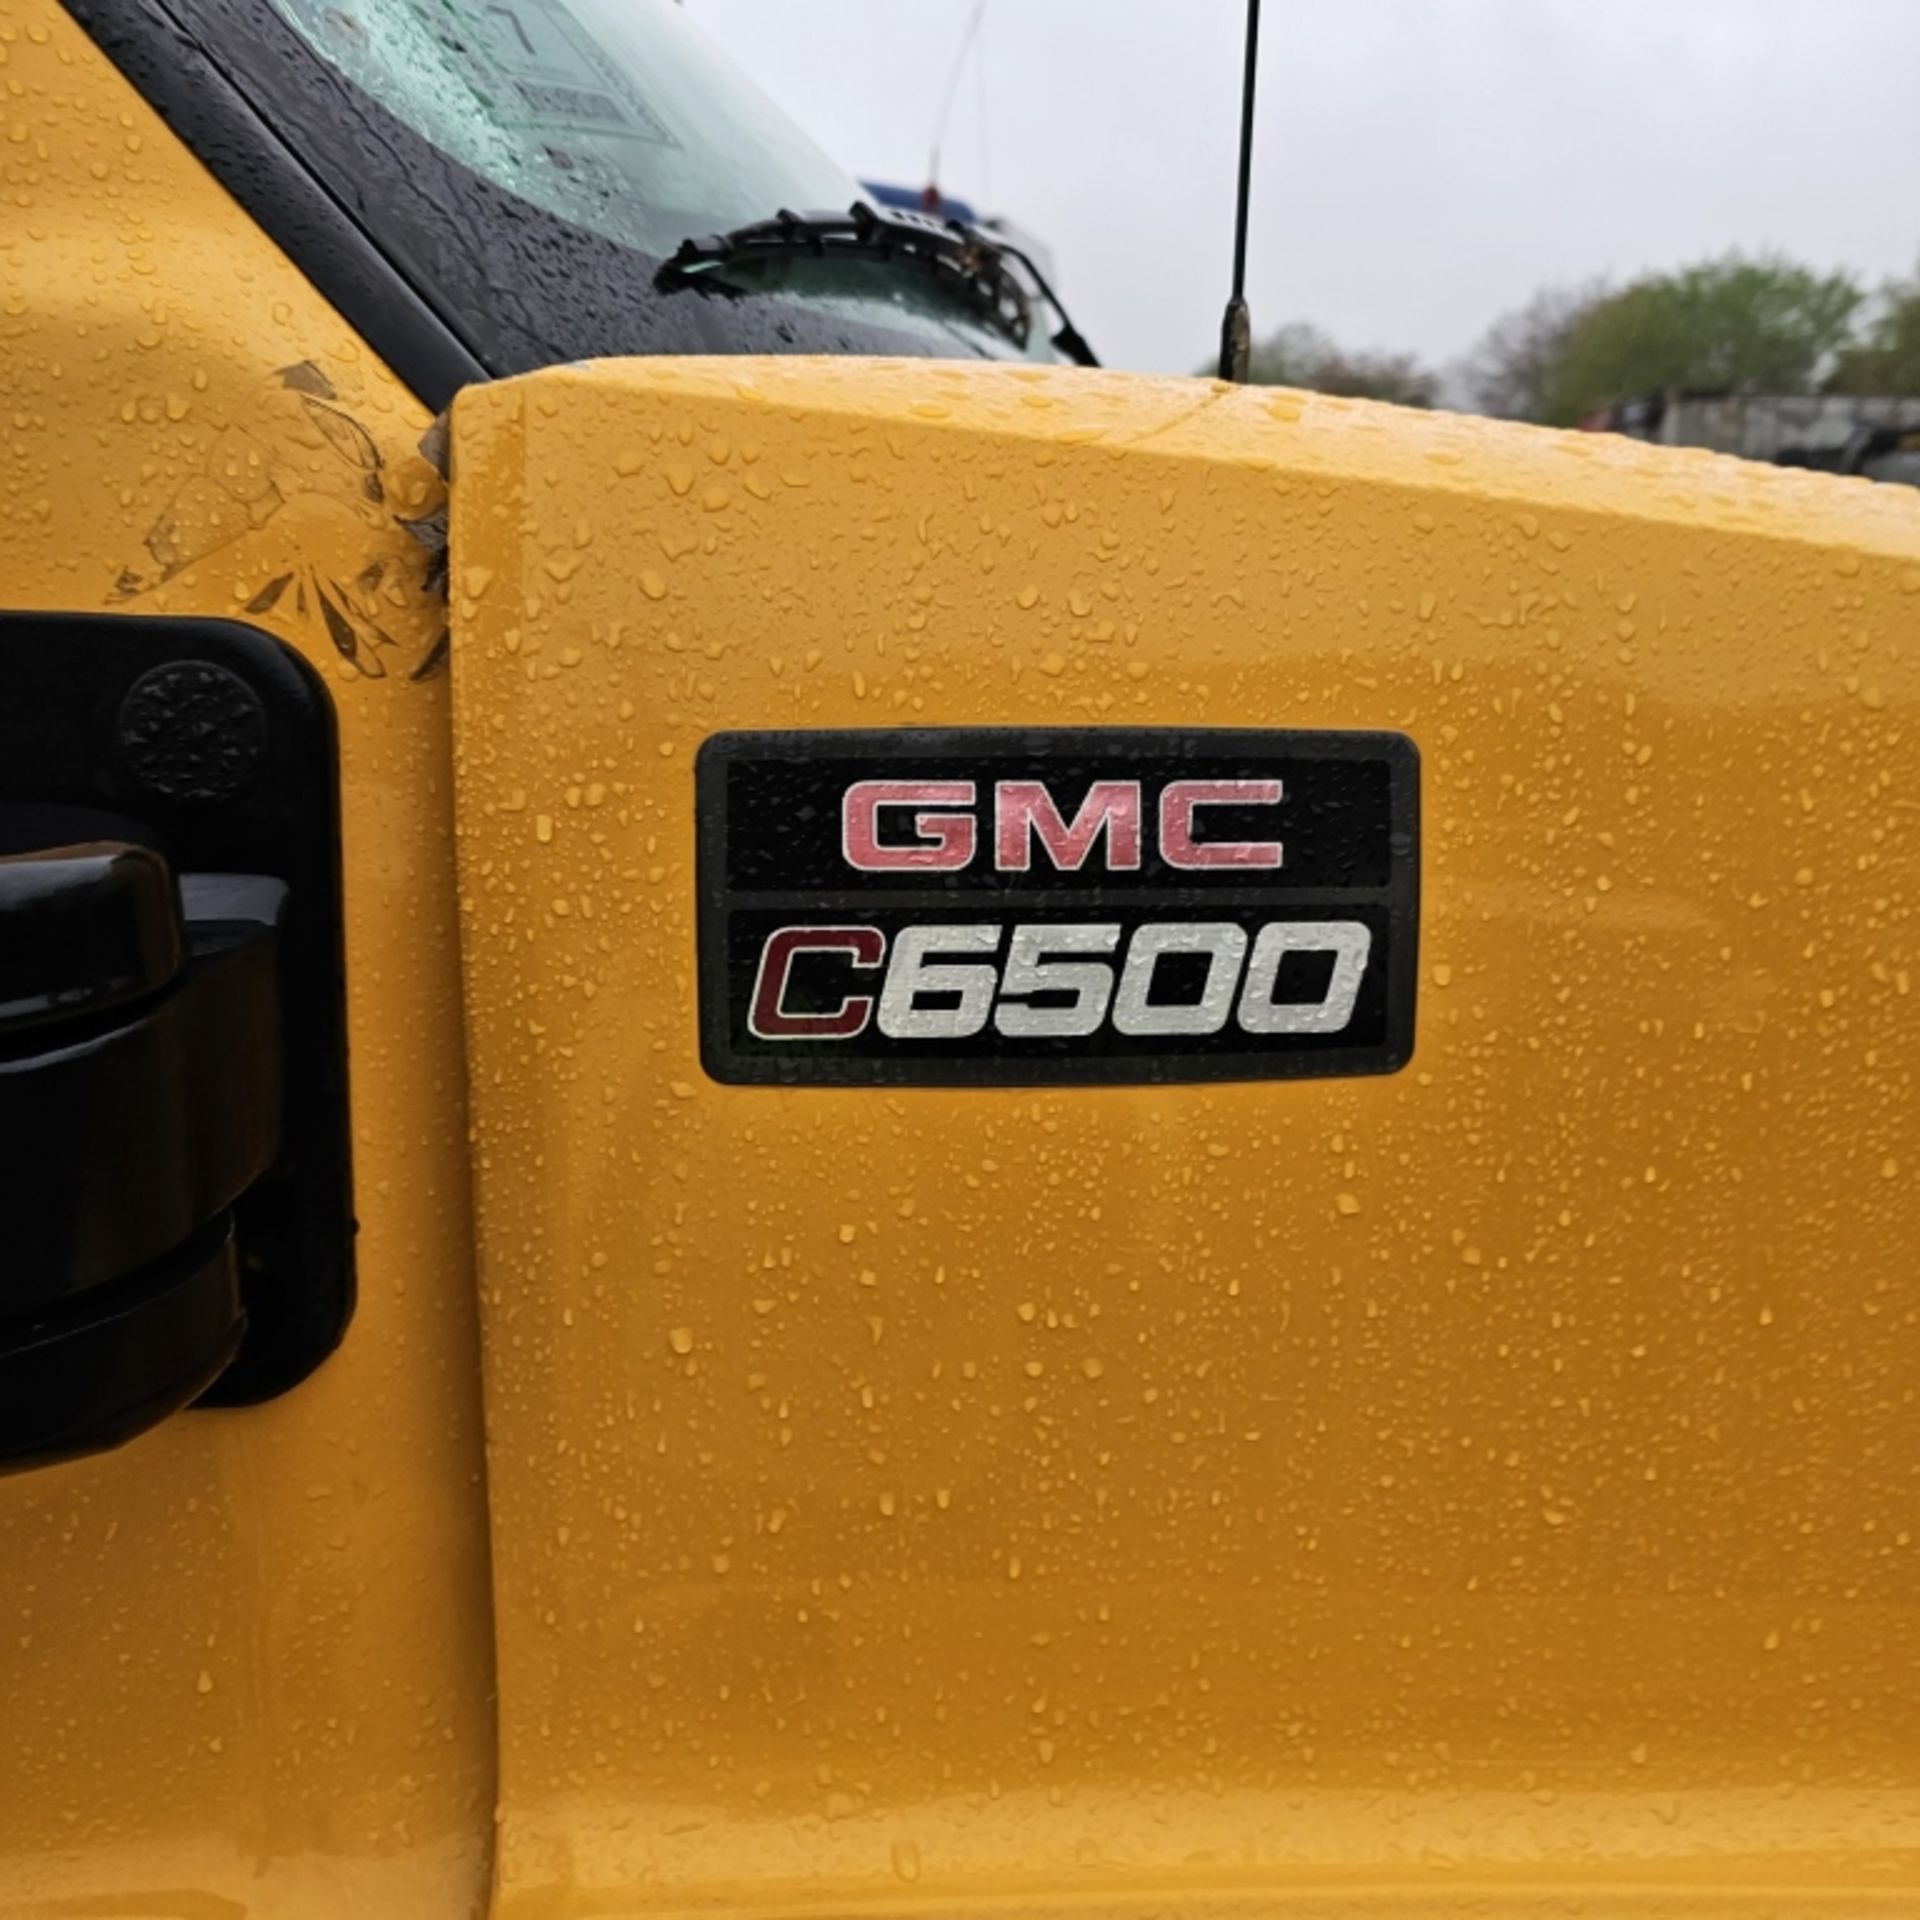 2004 Chevy C6500 Service Truck - Image 7 of 11